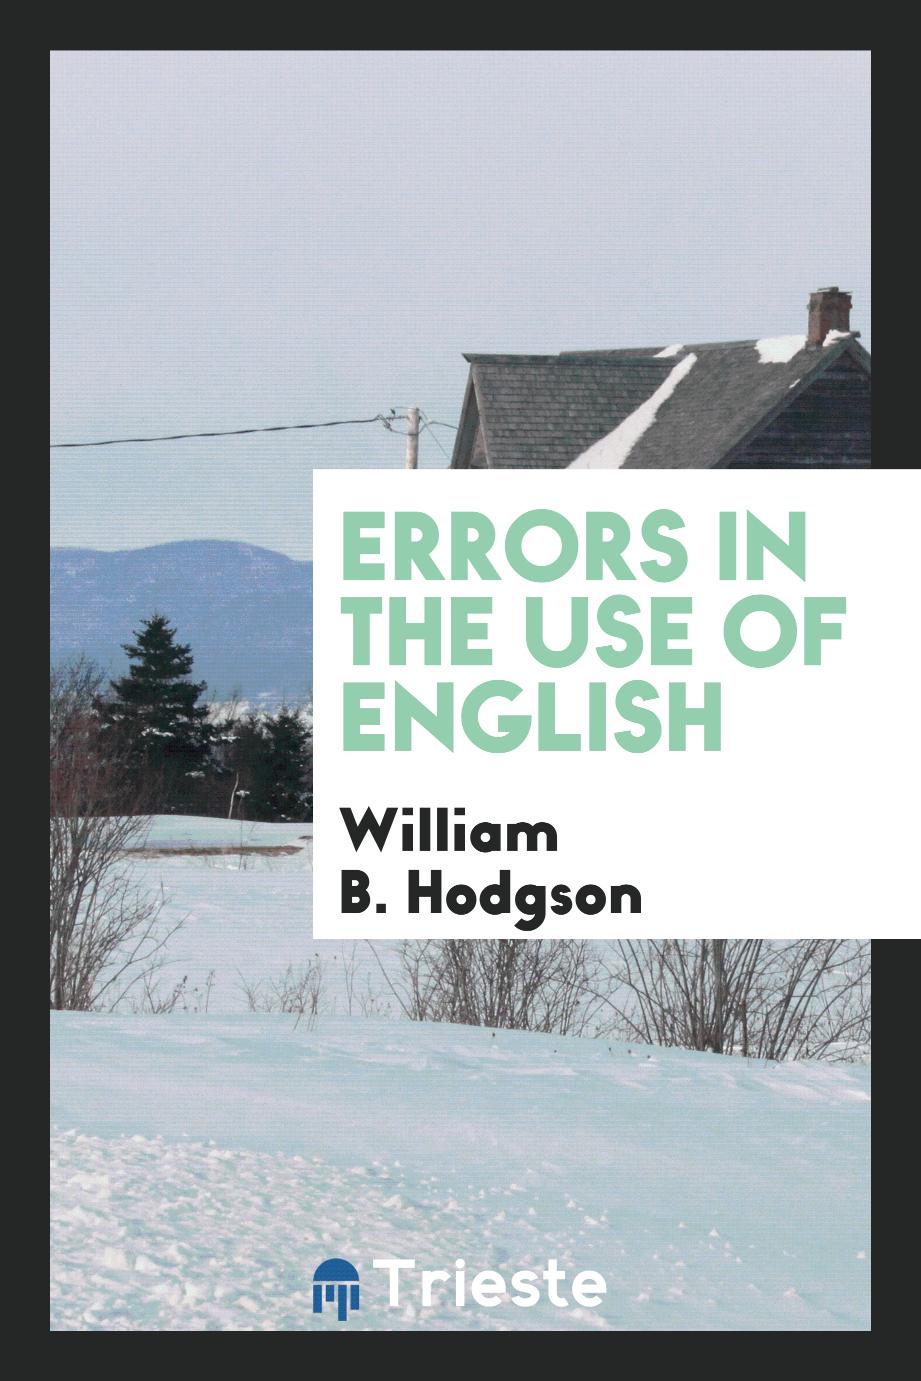 Errors in the use of English